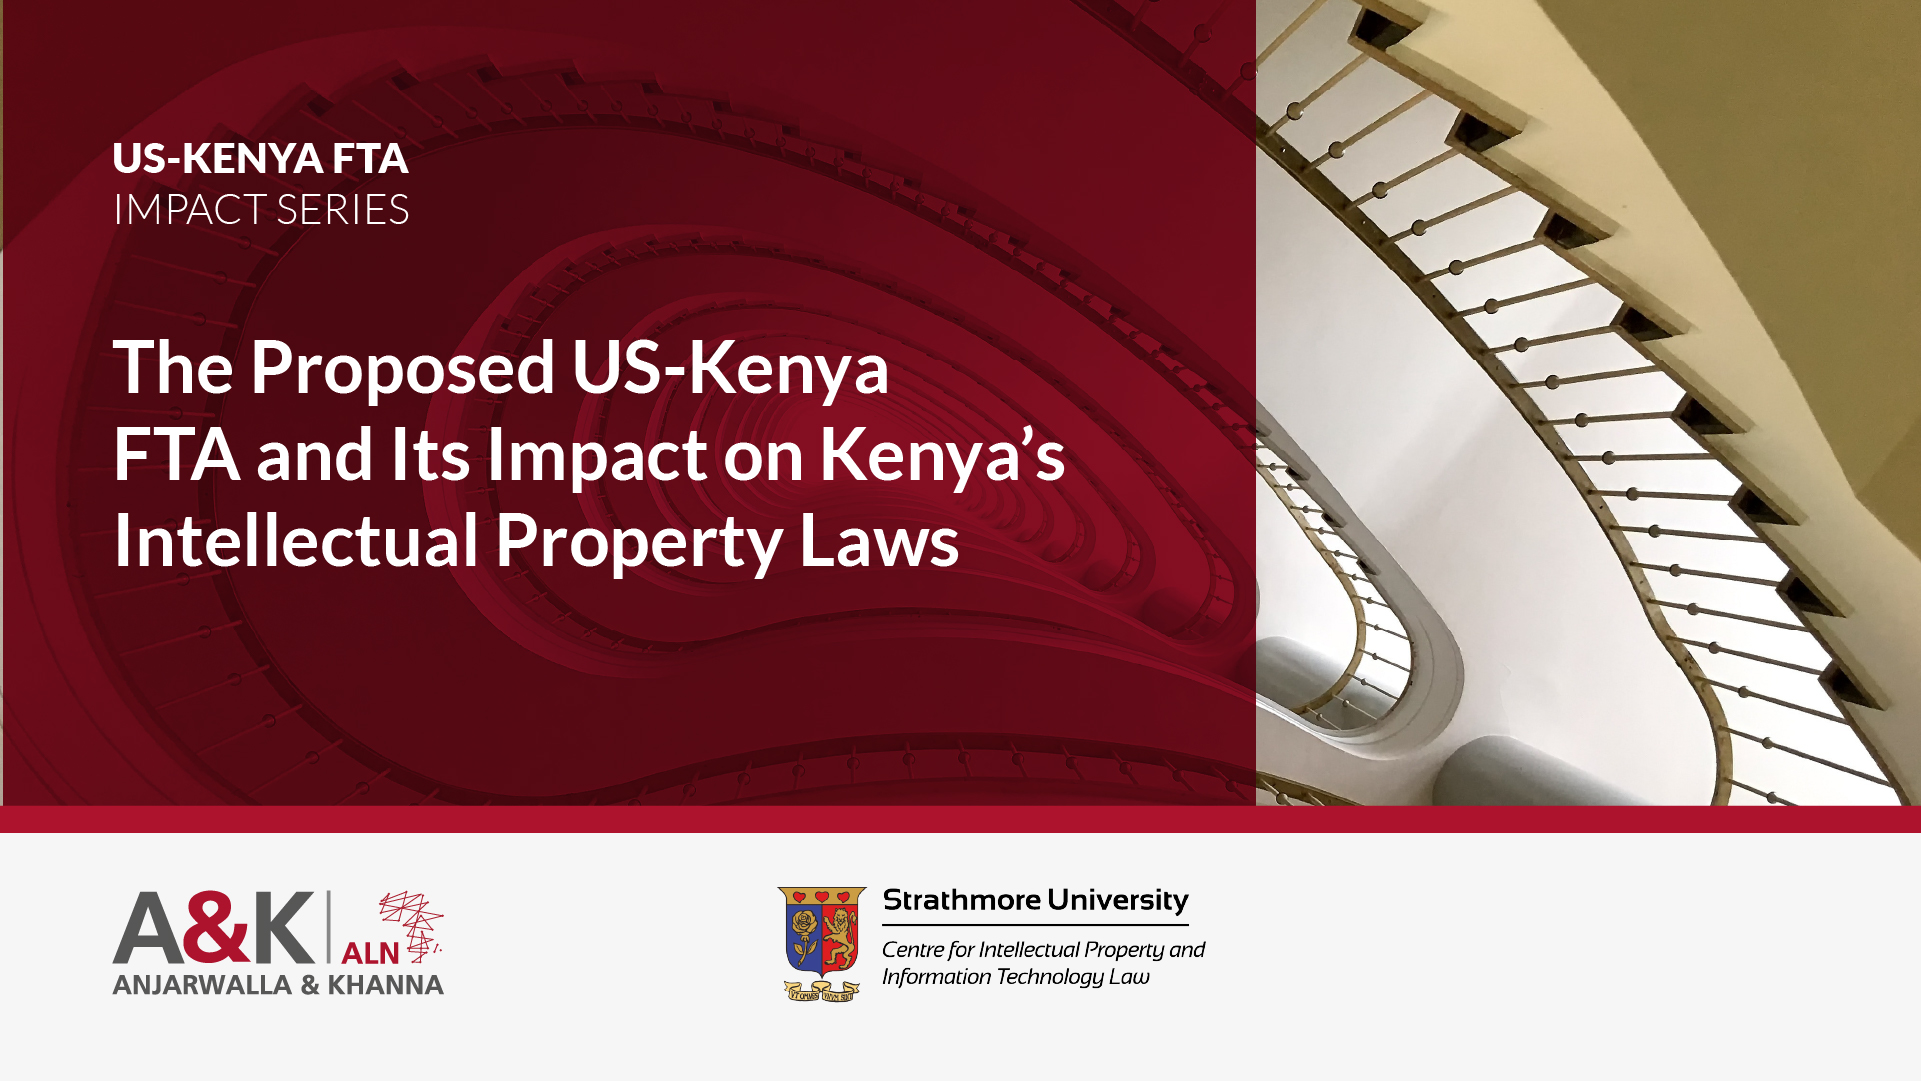 The Proposed US-Kenya FTA and Its Impact on Kenya’s Intellectual Property Laws